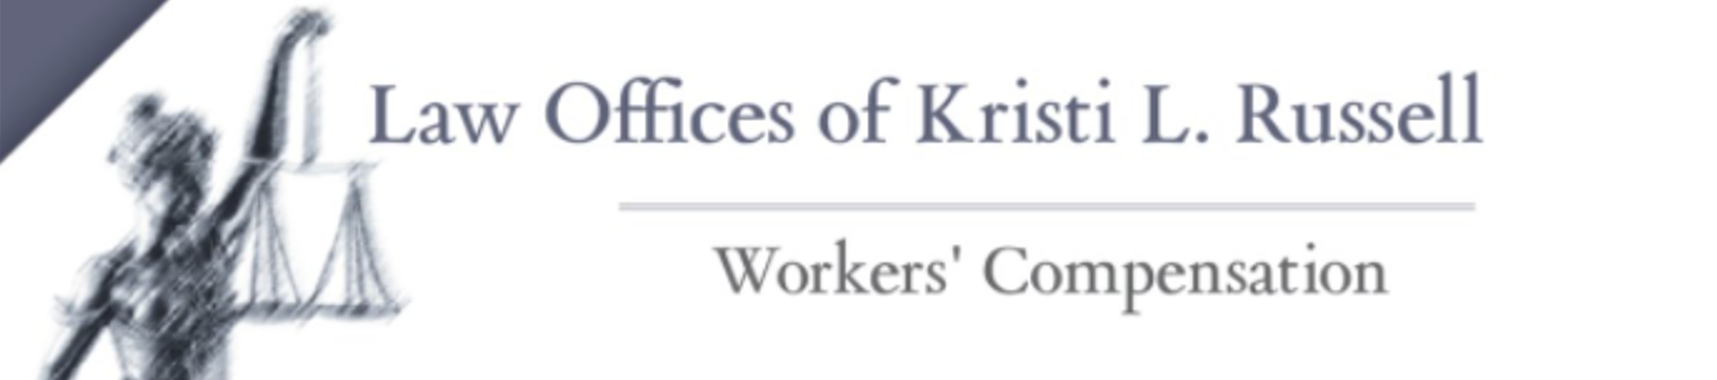 Law Offices of Kristi L. Russell